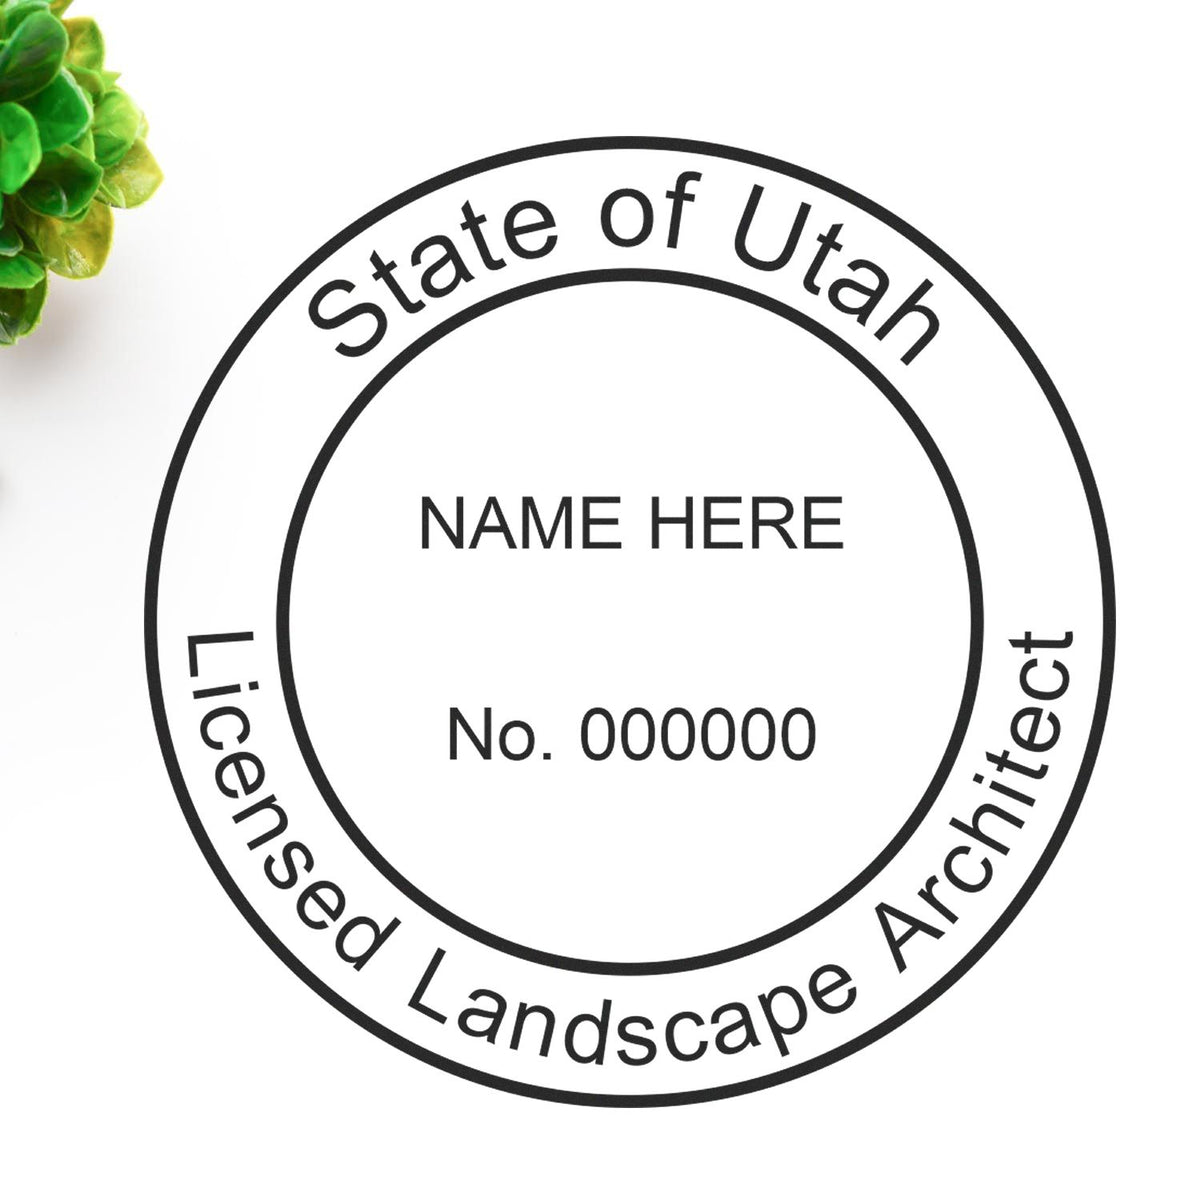 This paper is stamped with a sample imprint of the Utah Landscape Architectural Seal Stamp, signifying its quality and reliability.